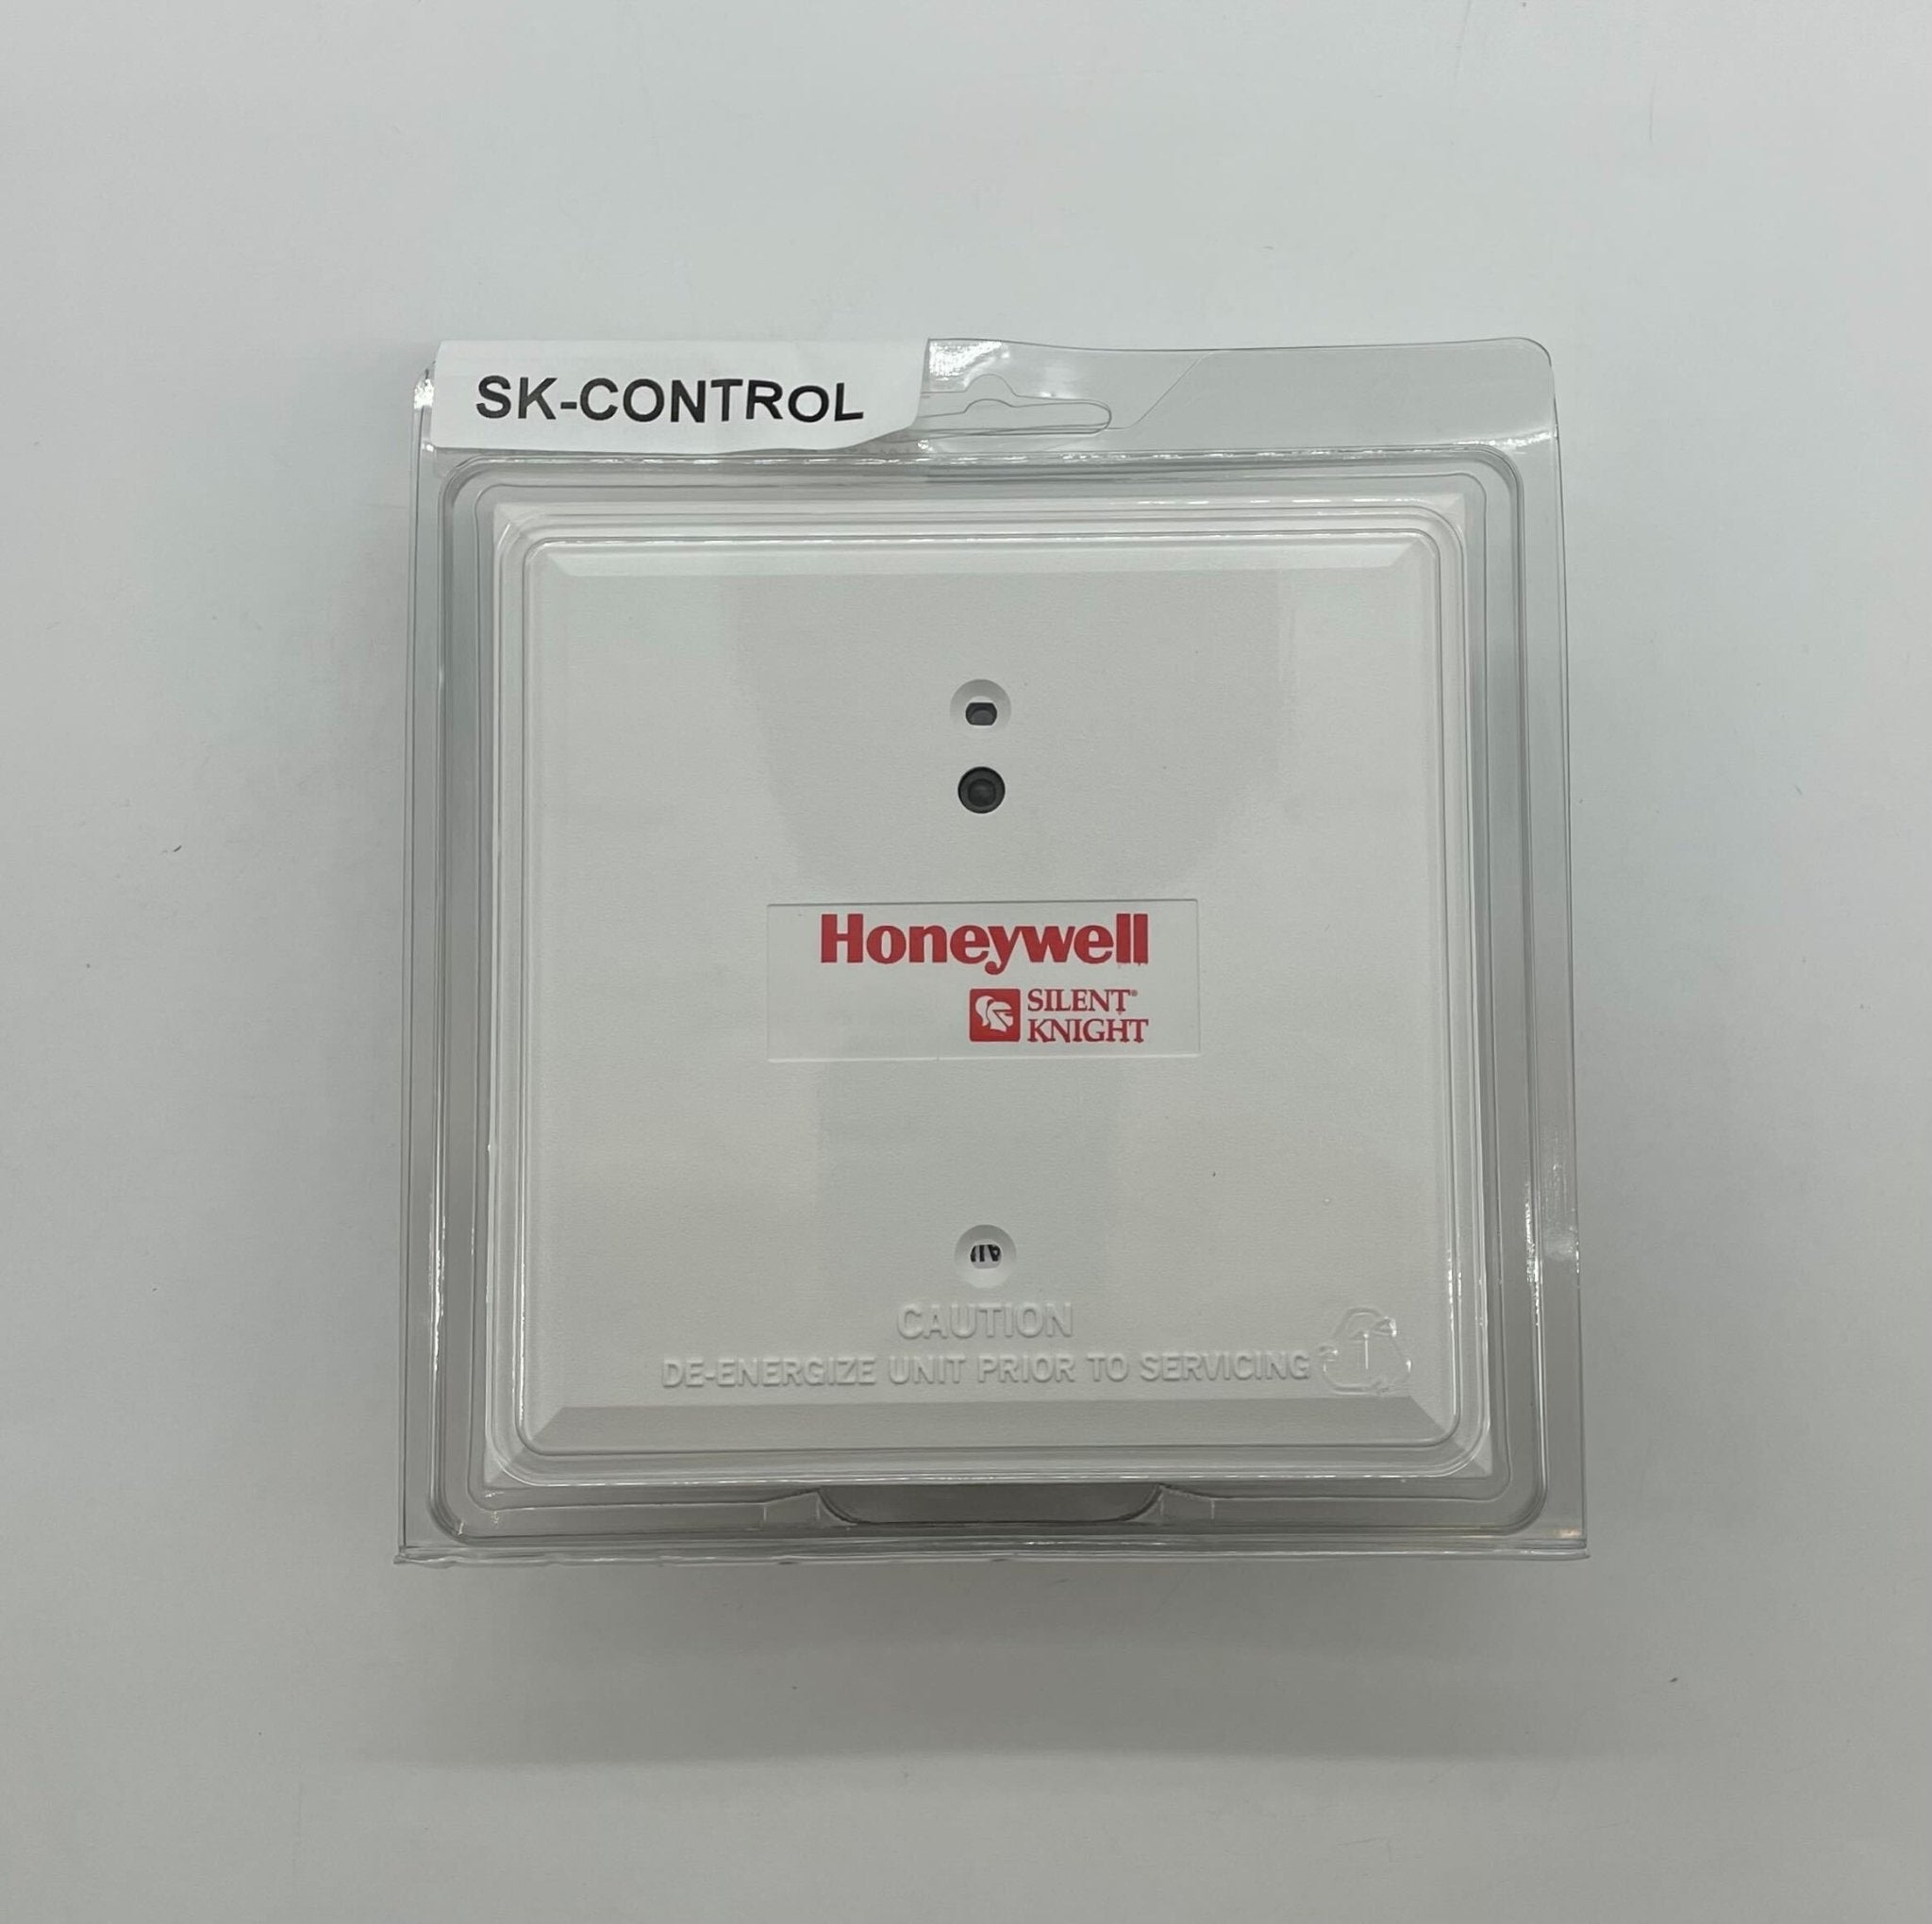 Silent Knight SK-CONTROL - The Fire Alarm Supplier